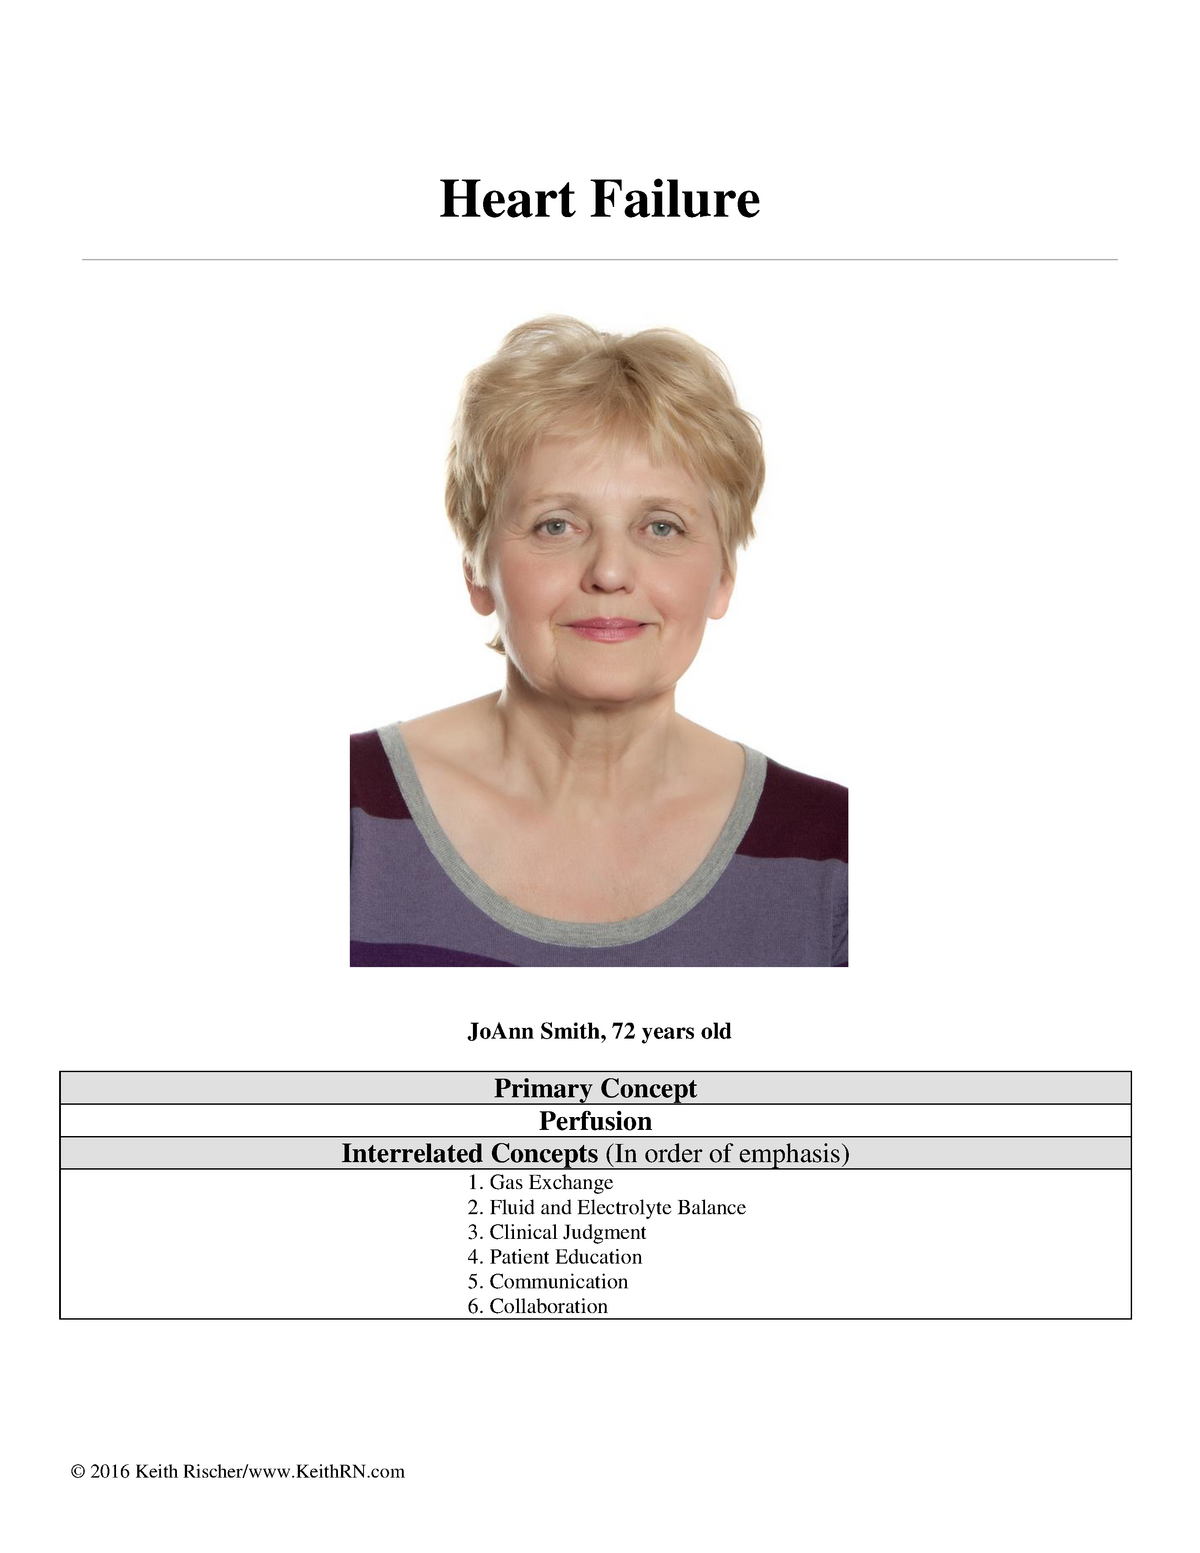 keith rn heart failure case study answers quizlet